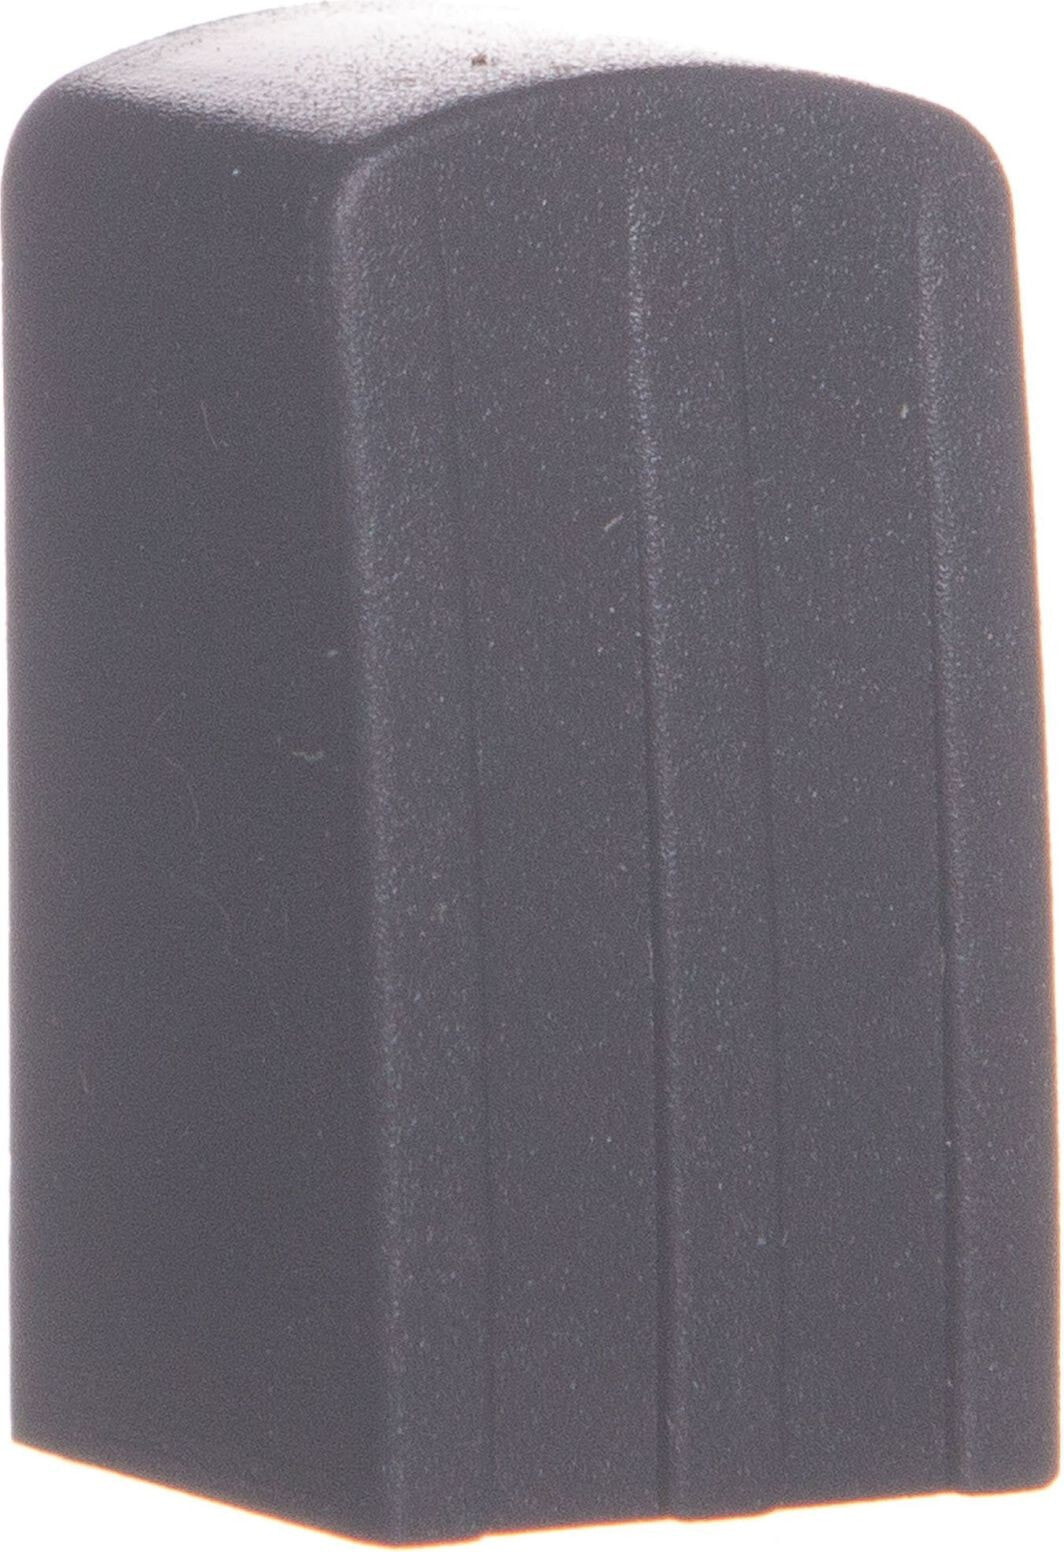 Schneider Side cover for busbars 2P (A9XPE210)